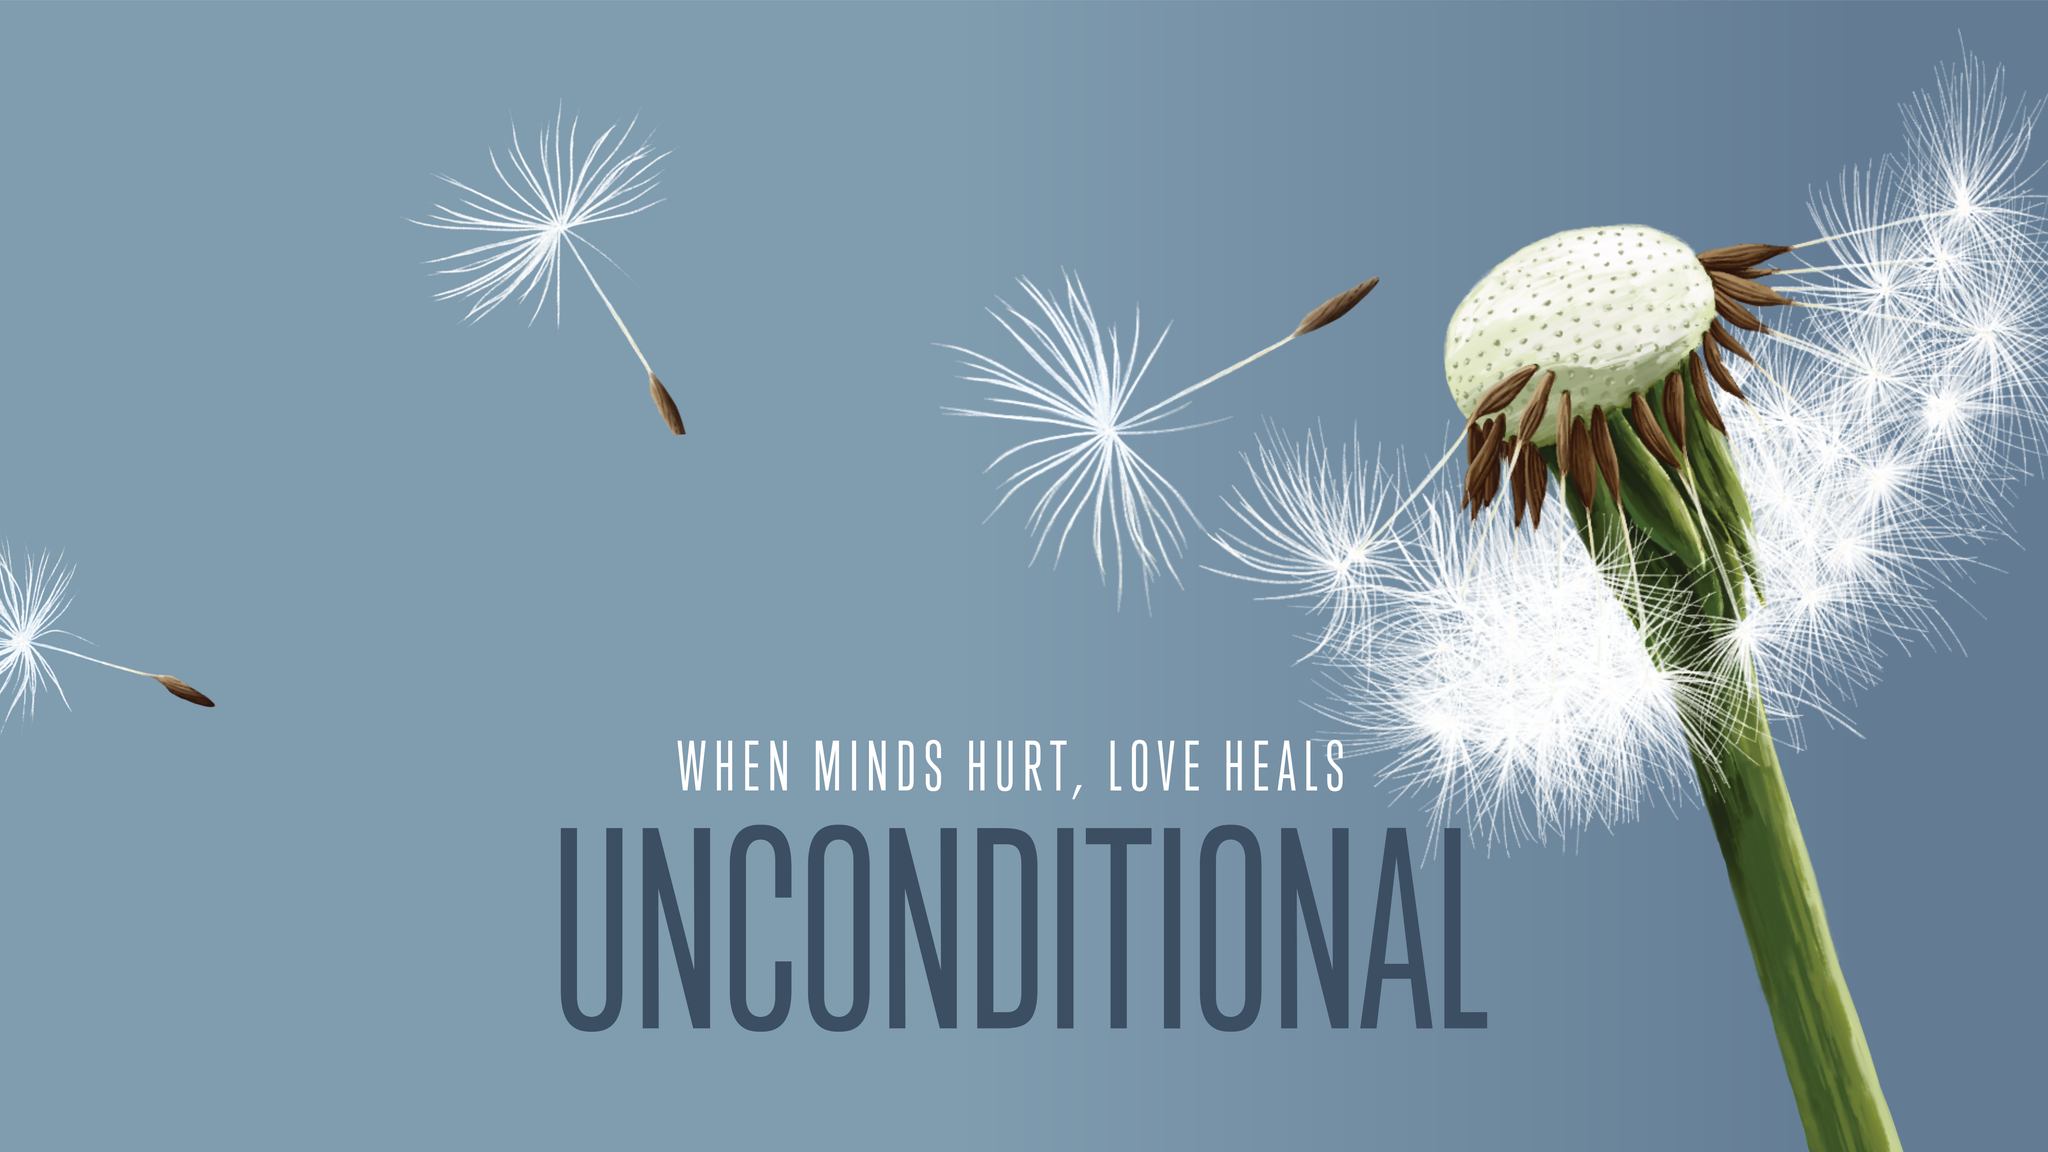 Local movie premiere for PBS production of Unconditional.